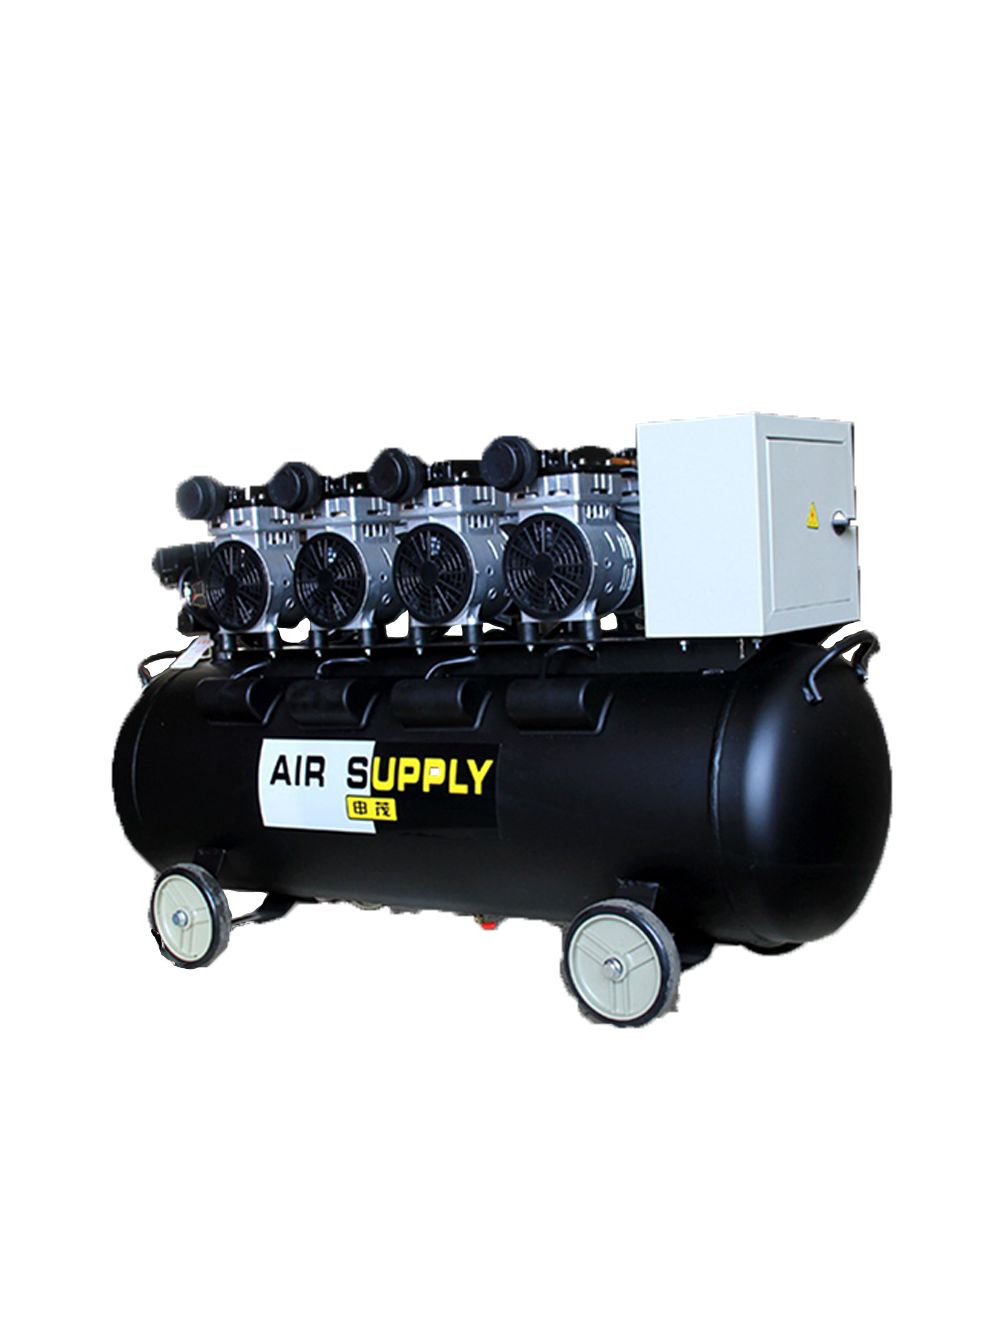 New In stock for sale, AIR SUPPLY Air Compressor 4X1200W-160L